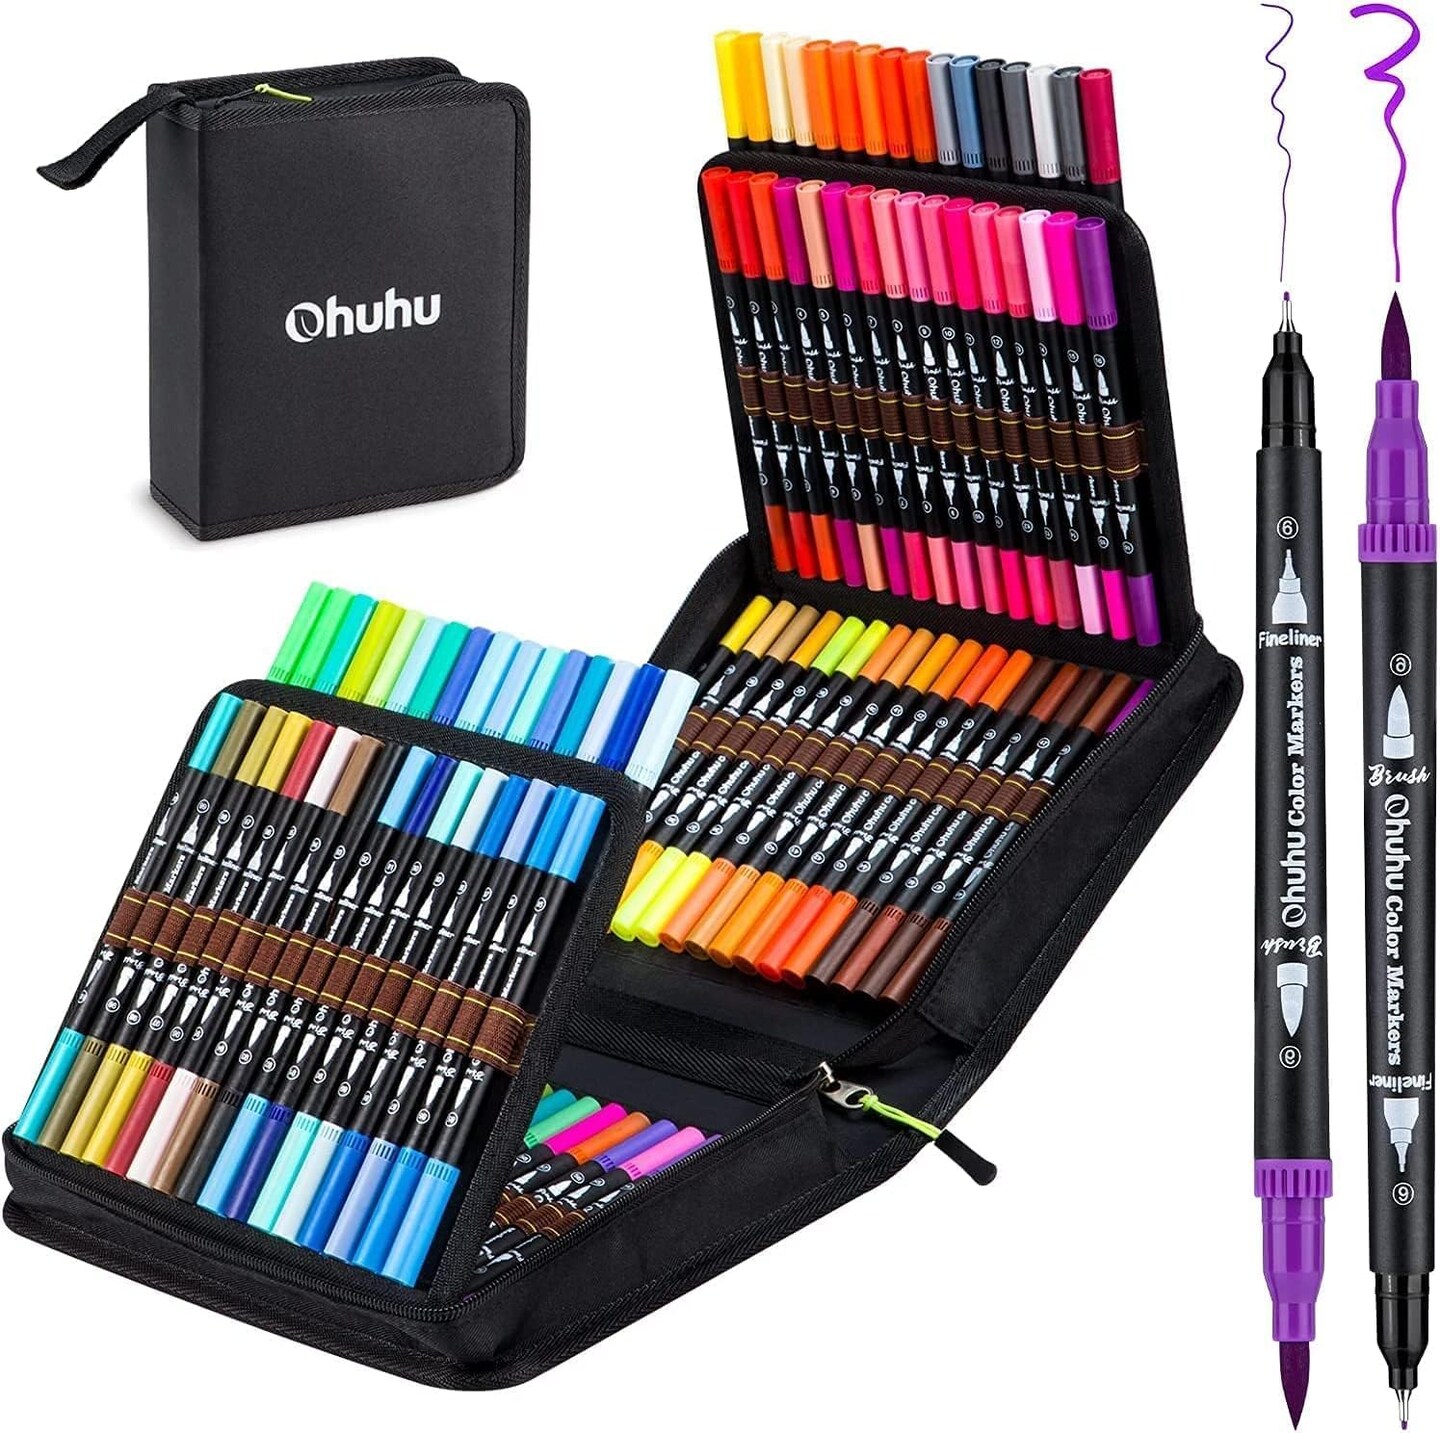 Ohuhu Markers for Adult Coloring Books: 100 Colors Brush Pens Dual Brush Fine Tip Drawing Pens Water-Based Coloring Markers for Calligraphy Bullet Journal with Carrying Case -Maui (Black Package)